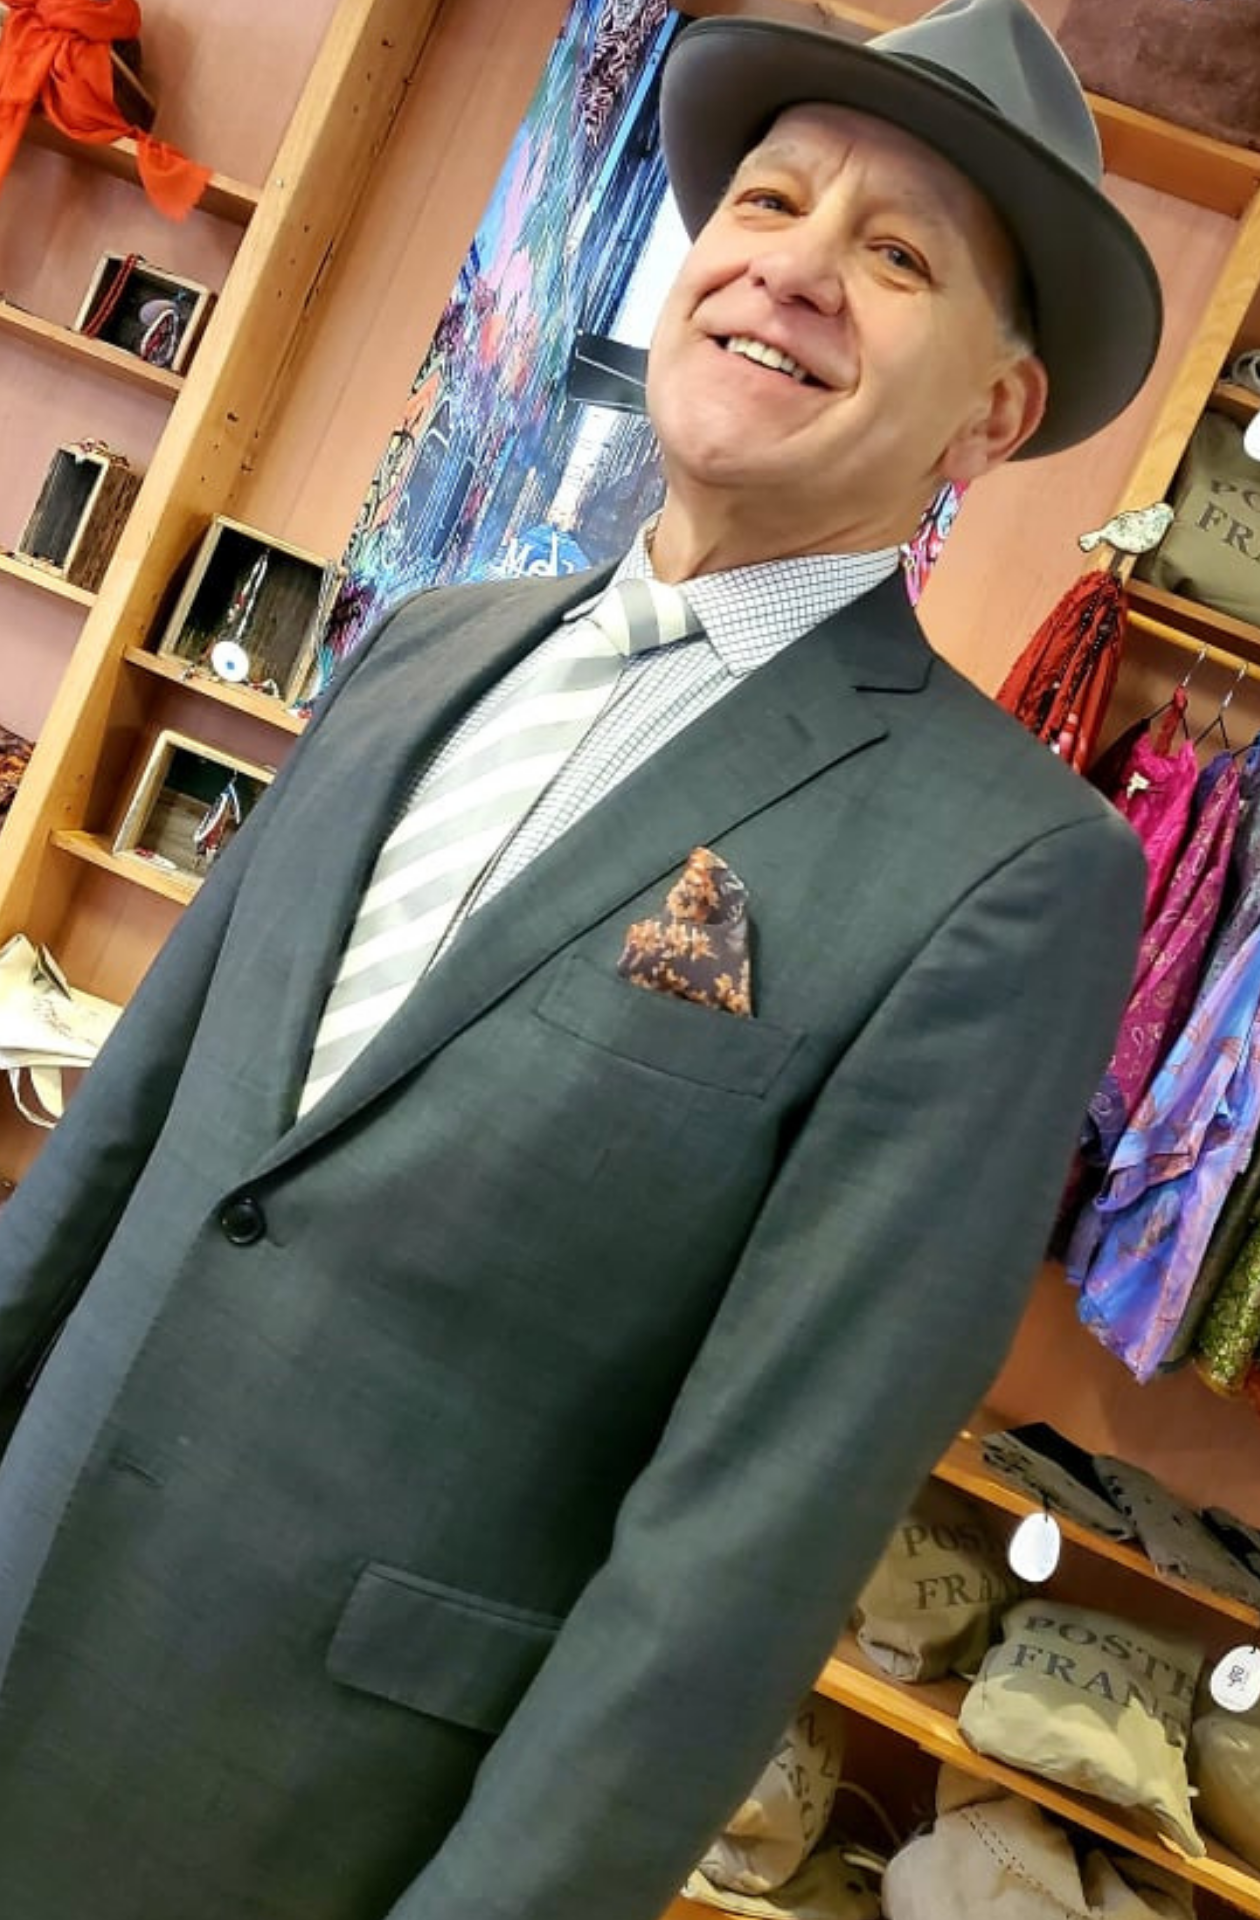 A portrait of a man with a deep grey suit on, a brown and orange pocket square in his breast pocket